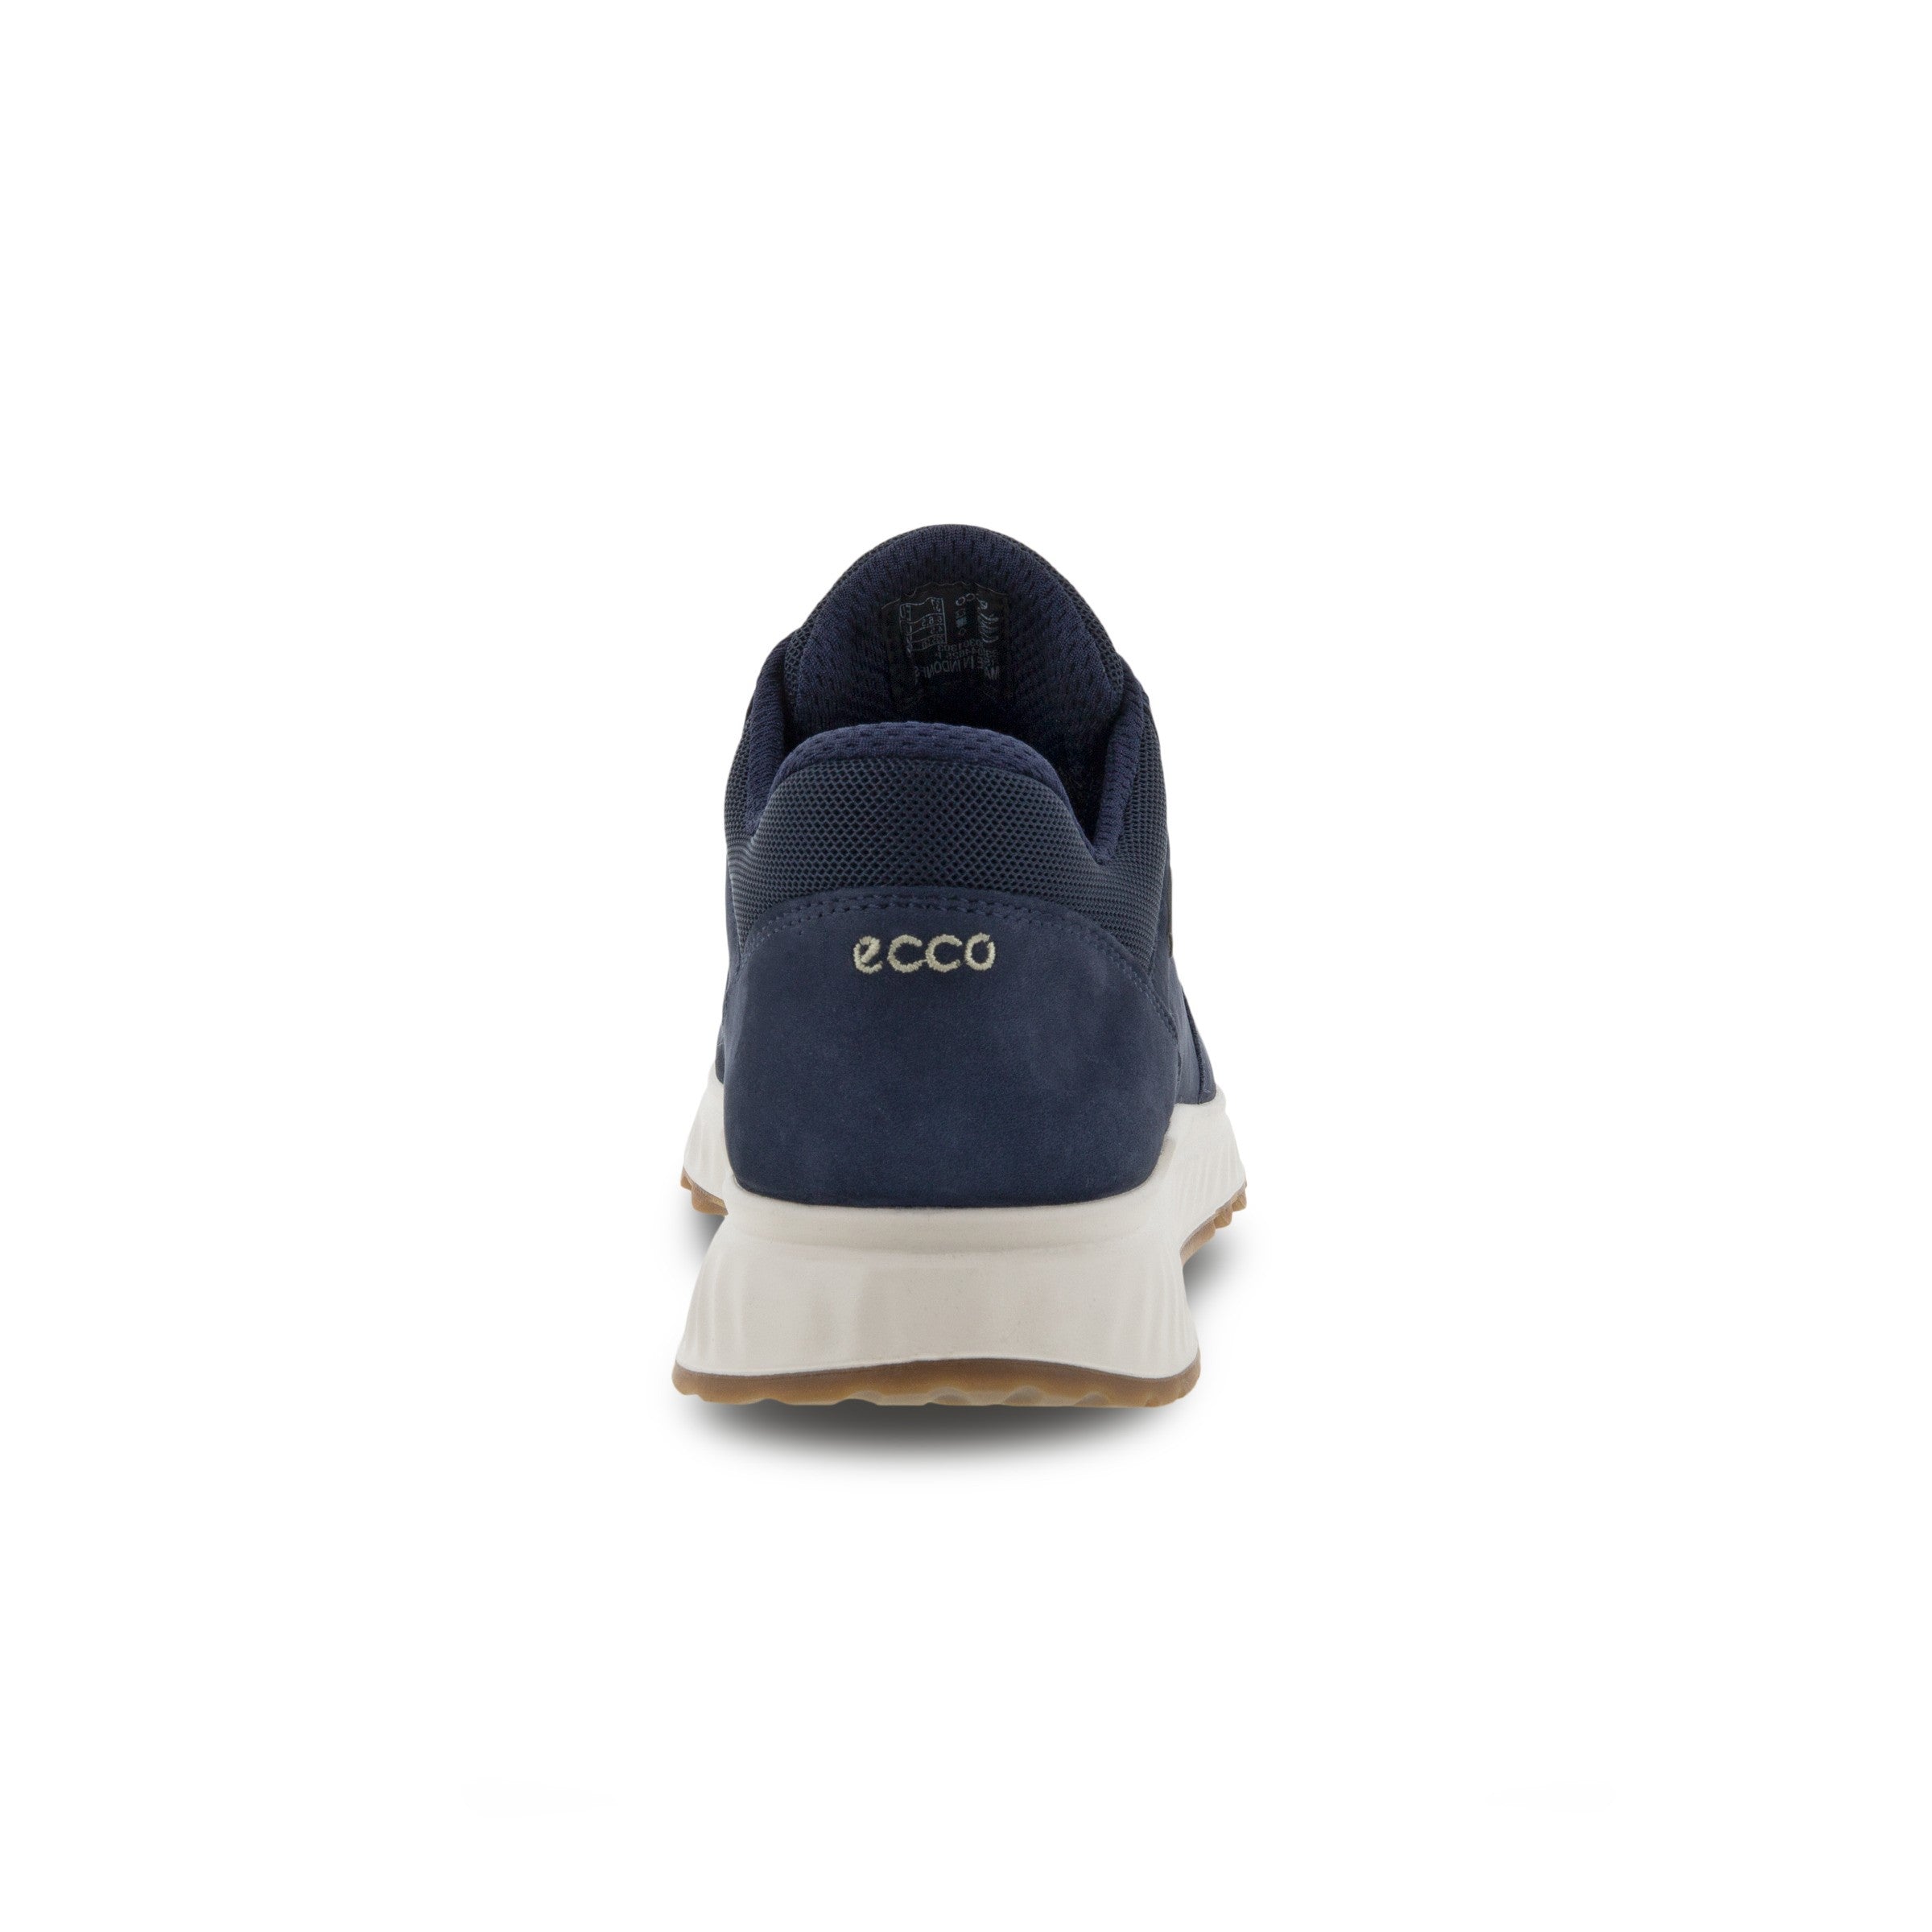 Ecco Exostride W Low GTX 835303 01303 Ladies Night Sky Blue Nubuck Waterproof Arch Support Lace Up Shoes